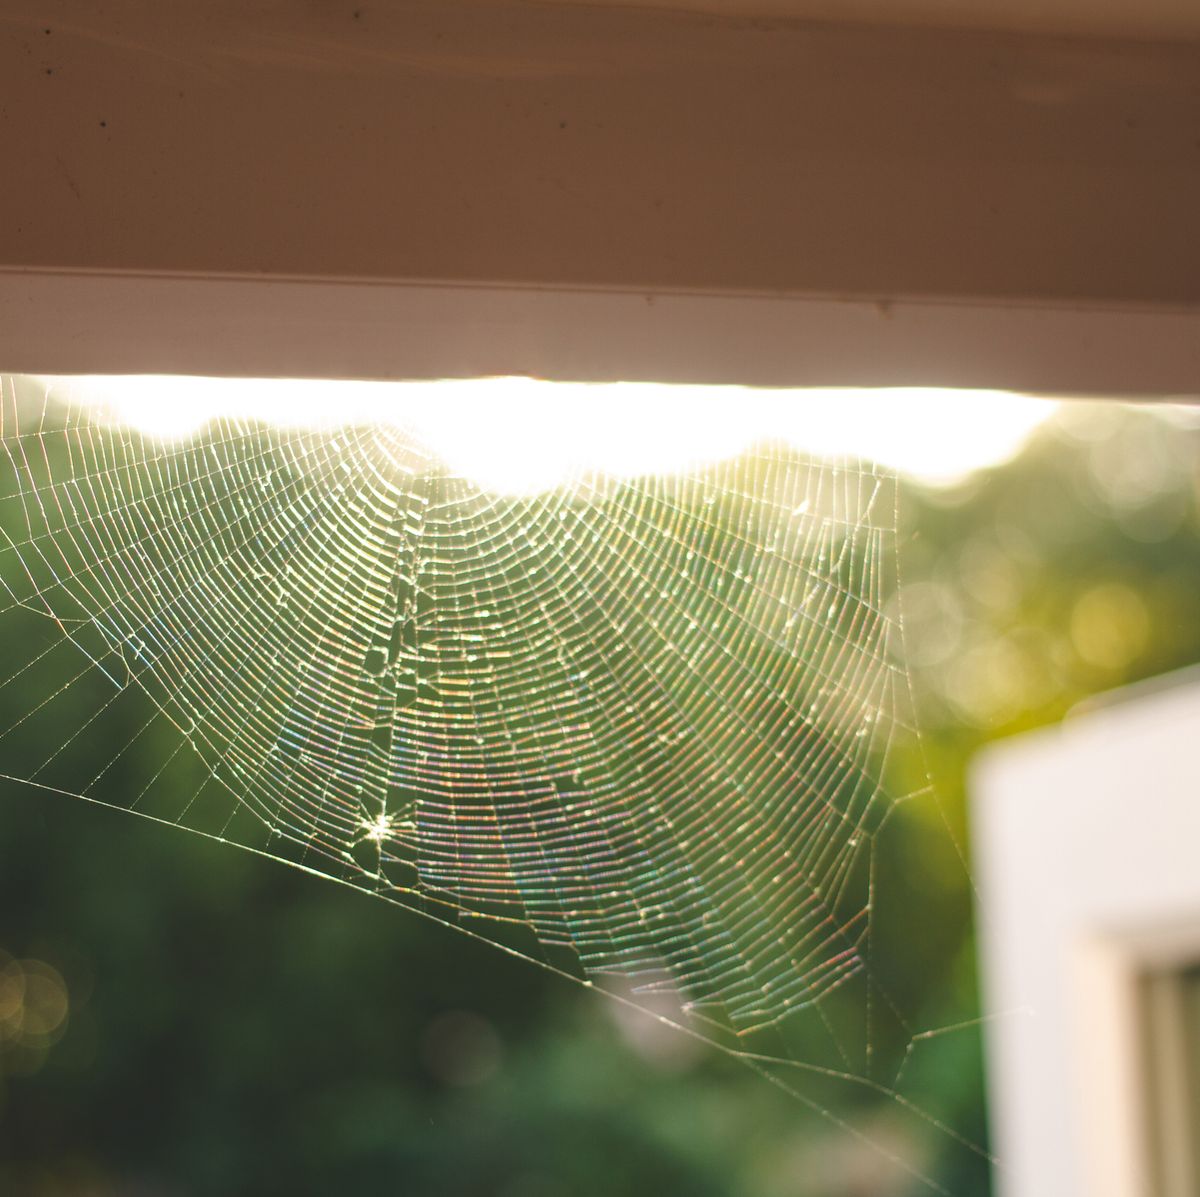 Spider Deterrent: 18 Ways To Get Rid Of Spiders Naturally